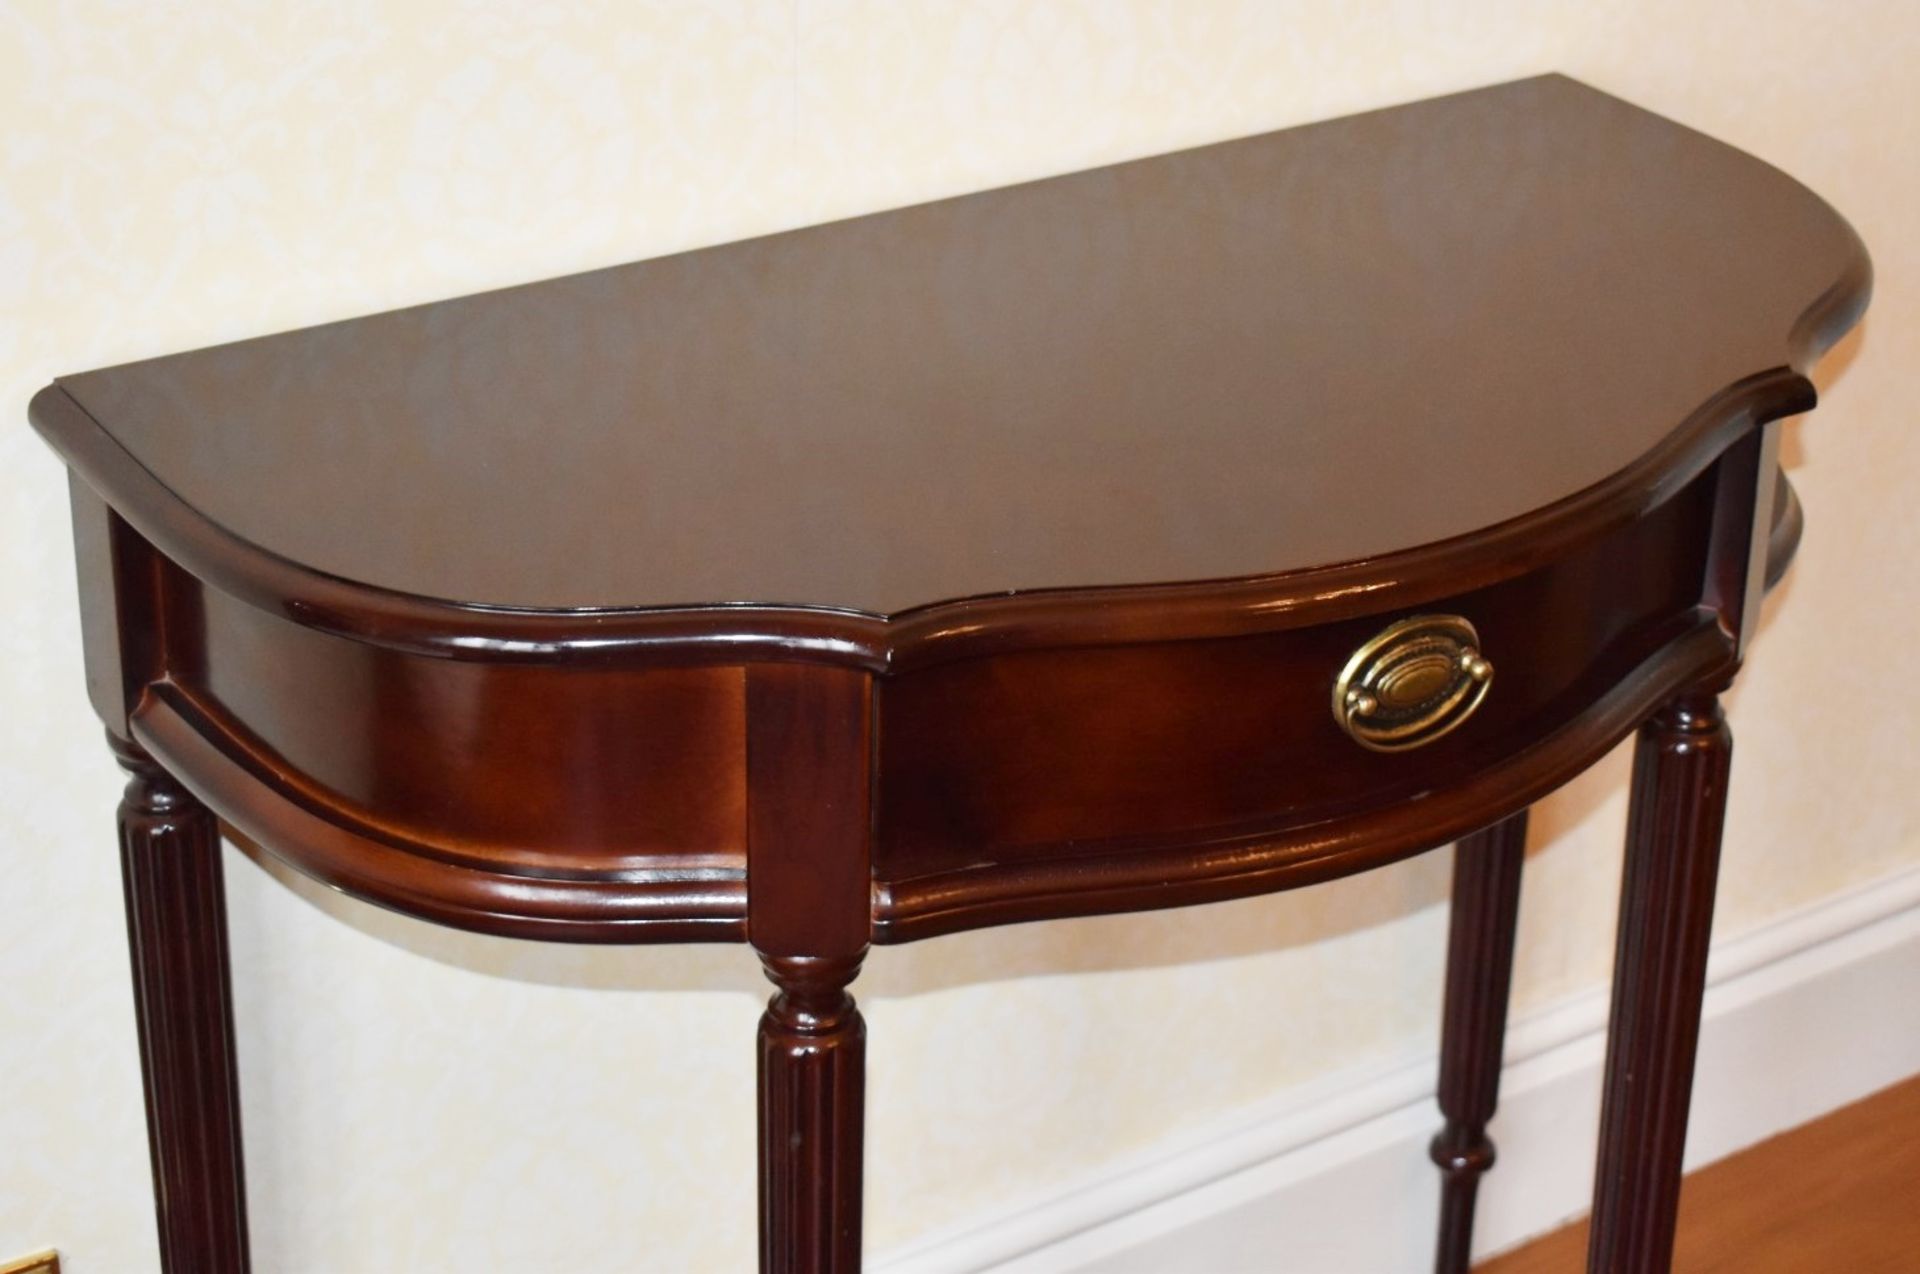 1 x Mahogany Half Moon Console Table With Brass Hardware and Single Drawer - Dimensions: H74 x W81 x - Image 3 of 4